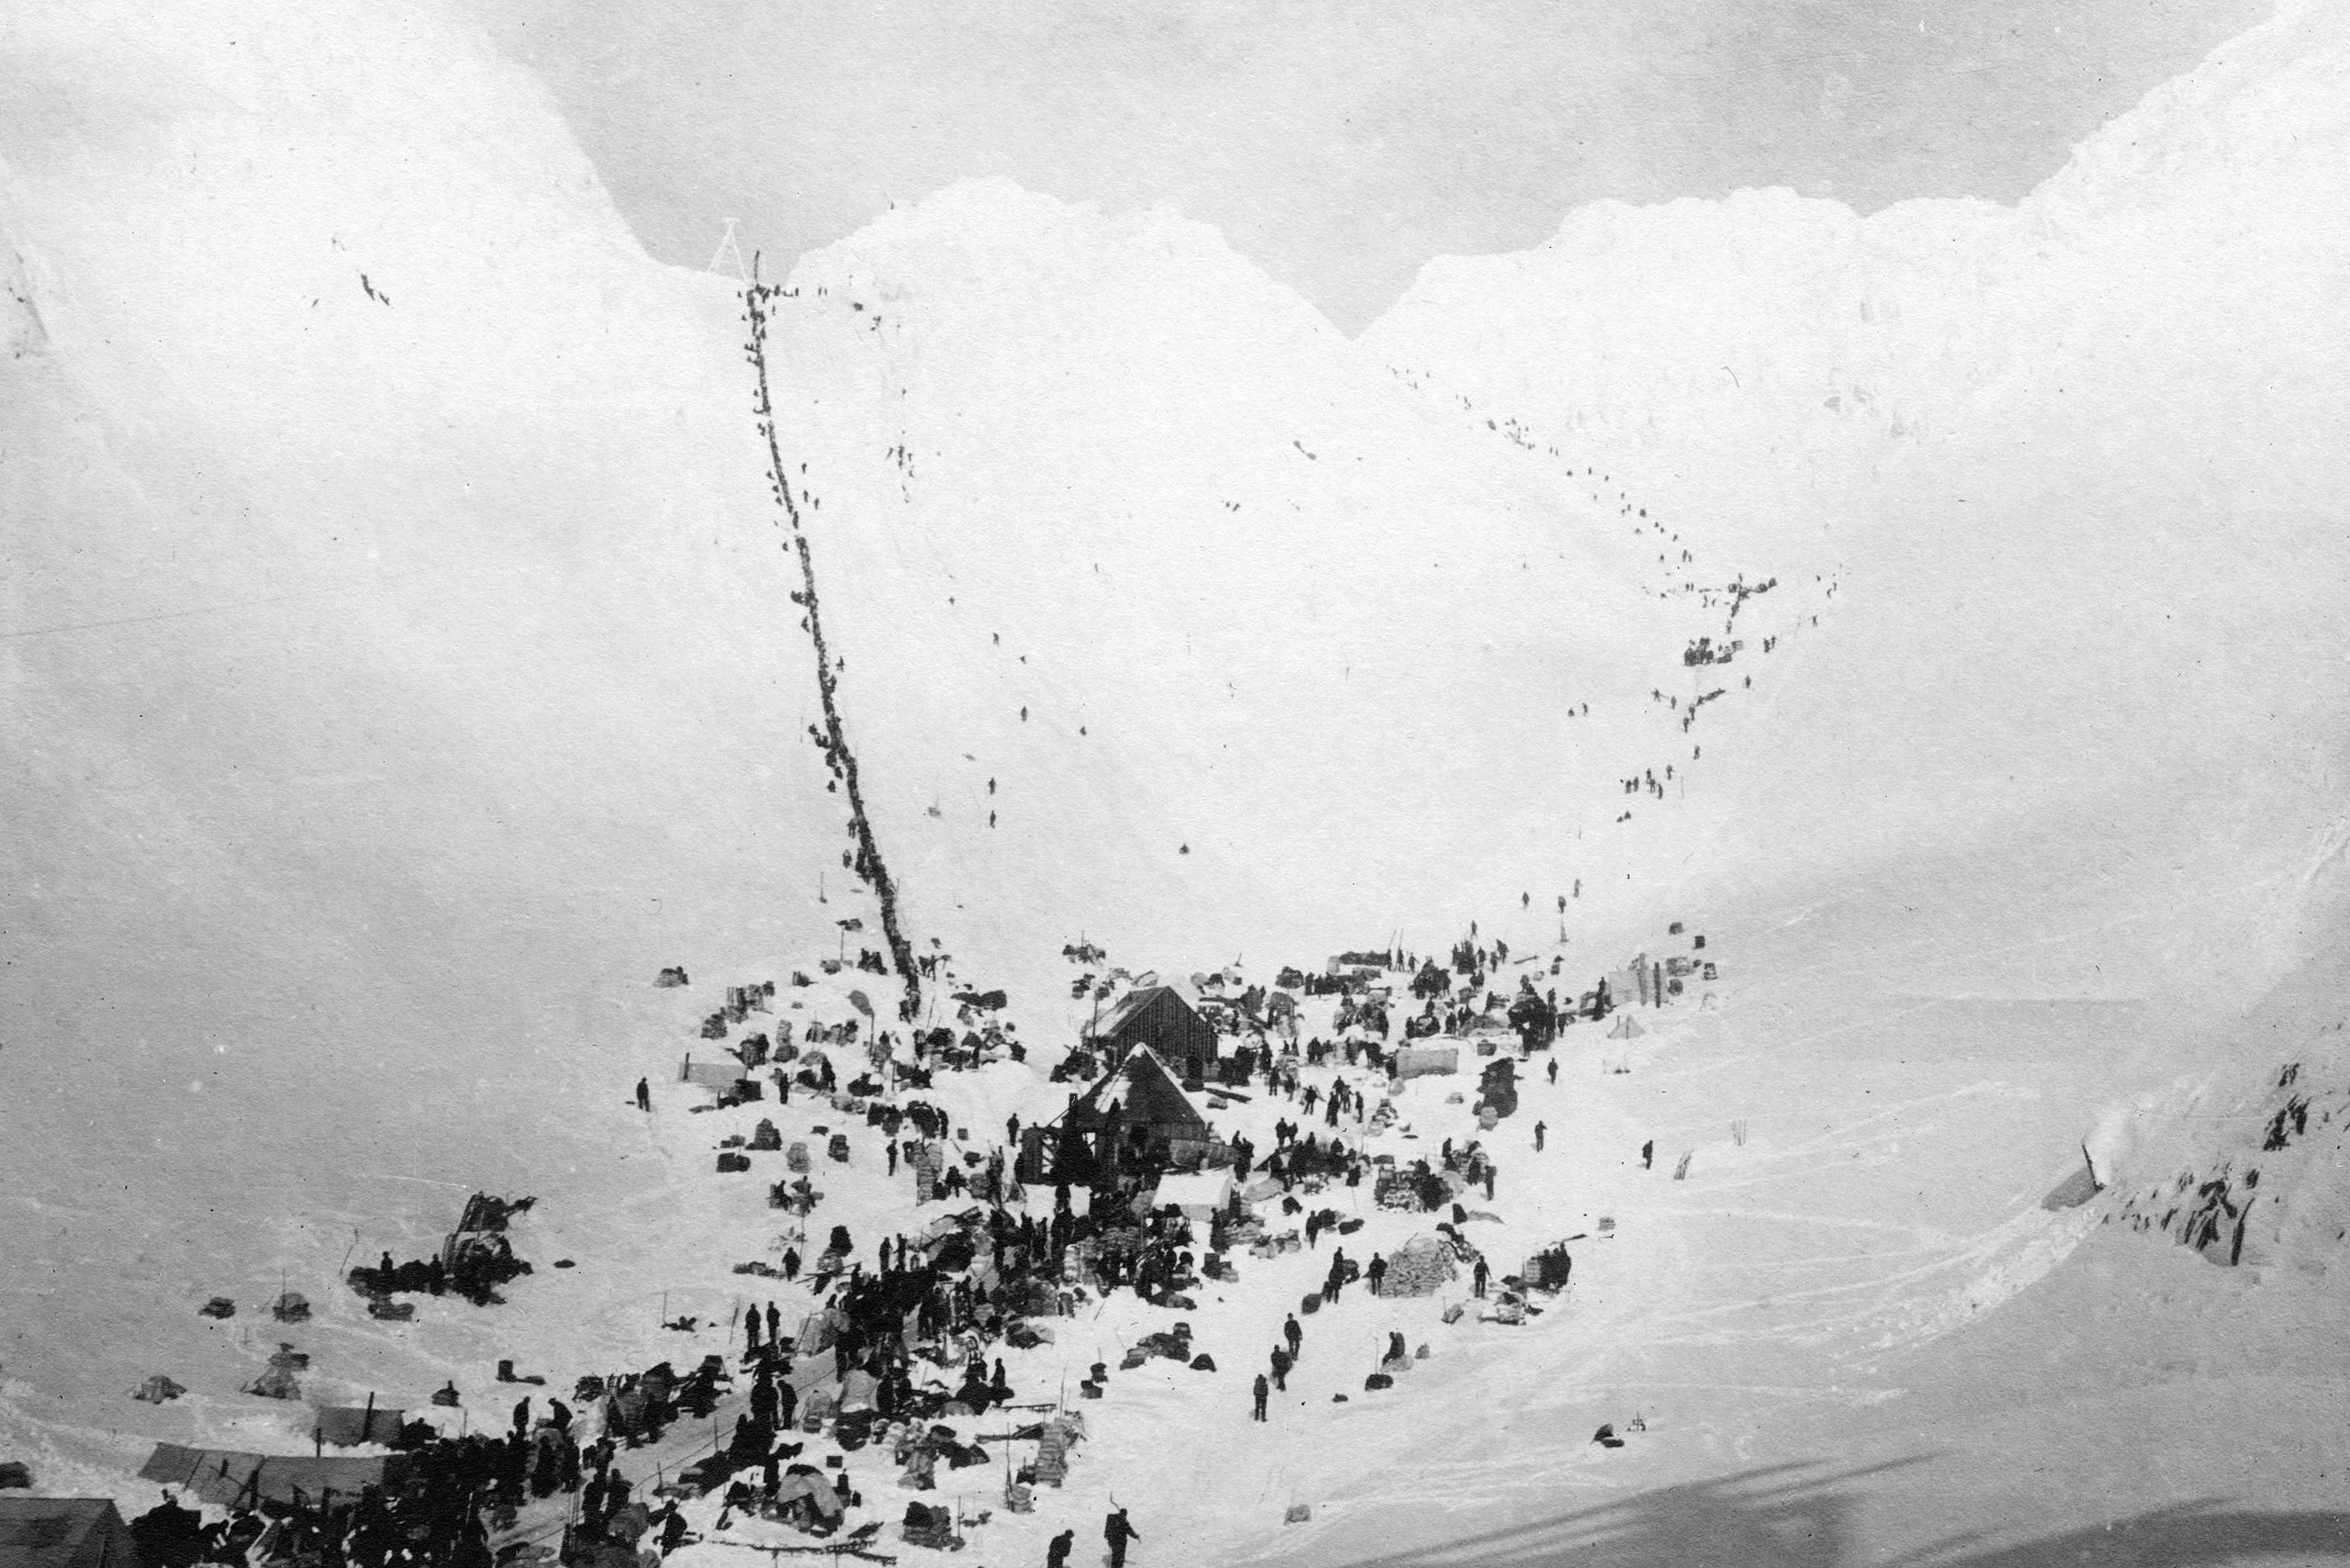 After the discovery of the Bonanza Creek close to Dawson City in 1896, the Chilikoot Trail was one of the first and by that time shortest routes to the Yukon River/Klondike River area. As horses could not climb the so called Golden Stairs (the most streneous part of the trail that you can see in this picture), every man had to carry his own belongings over the Chilikoot Pass. | Photo: Matthews, James Skitt, Major / Copyright: Public Domain / http://searcharchives.vancouver.ca/scales-and-summit-of-chilkoot-pass